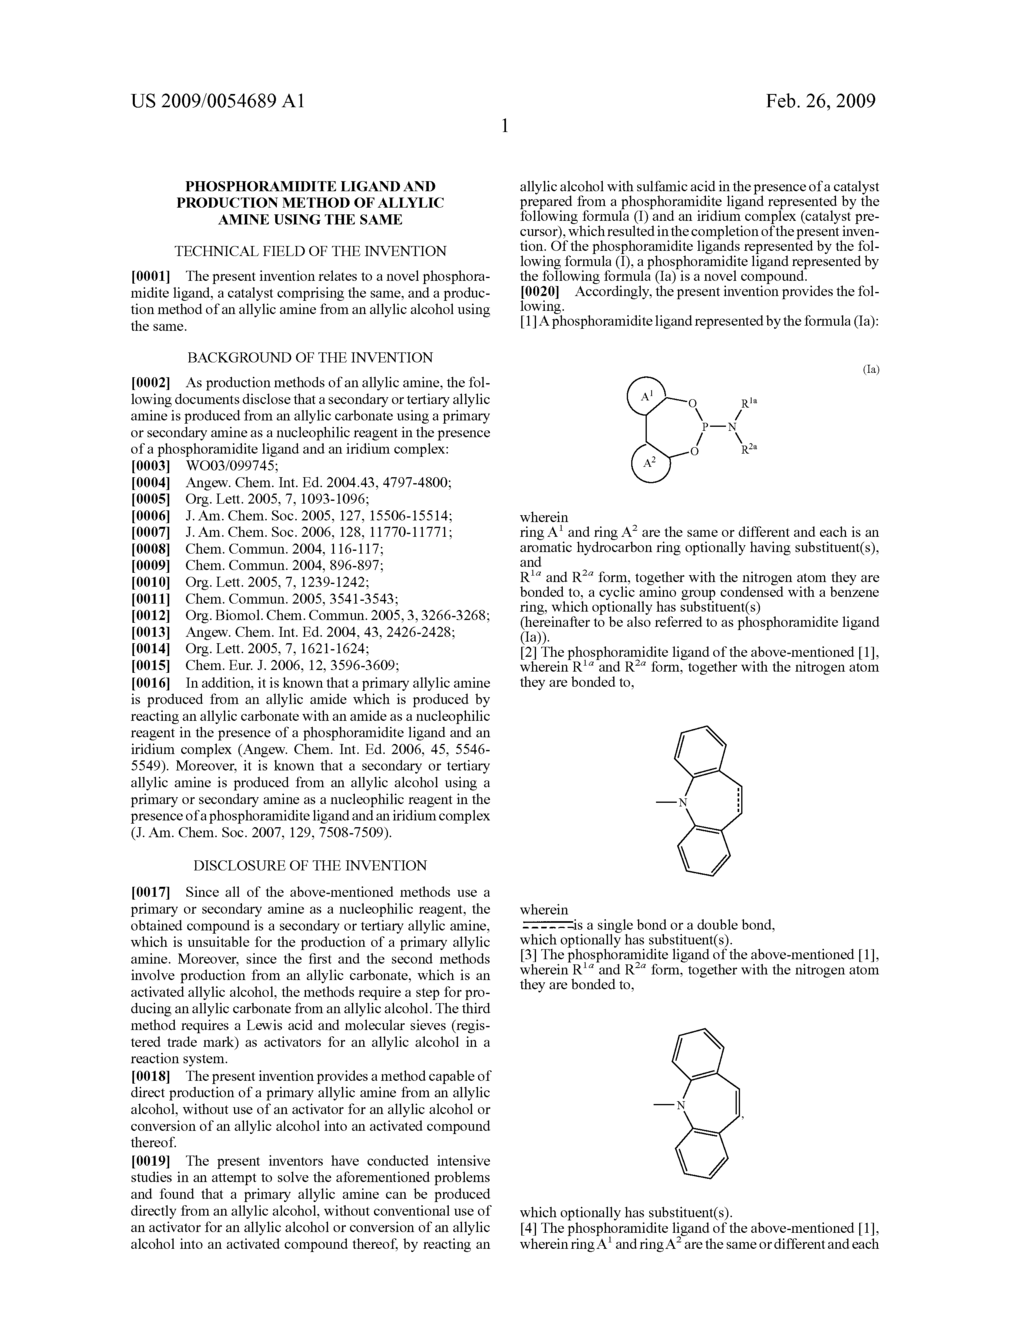 PHOSPHORAMIDITE LIGAND AND PRODUCTION METHOD OF ALLYLIC AMINE USING THE SAME - diagram, schematic, and image 02